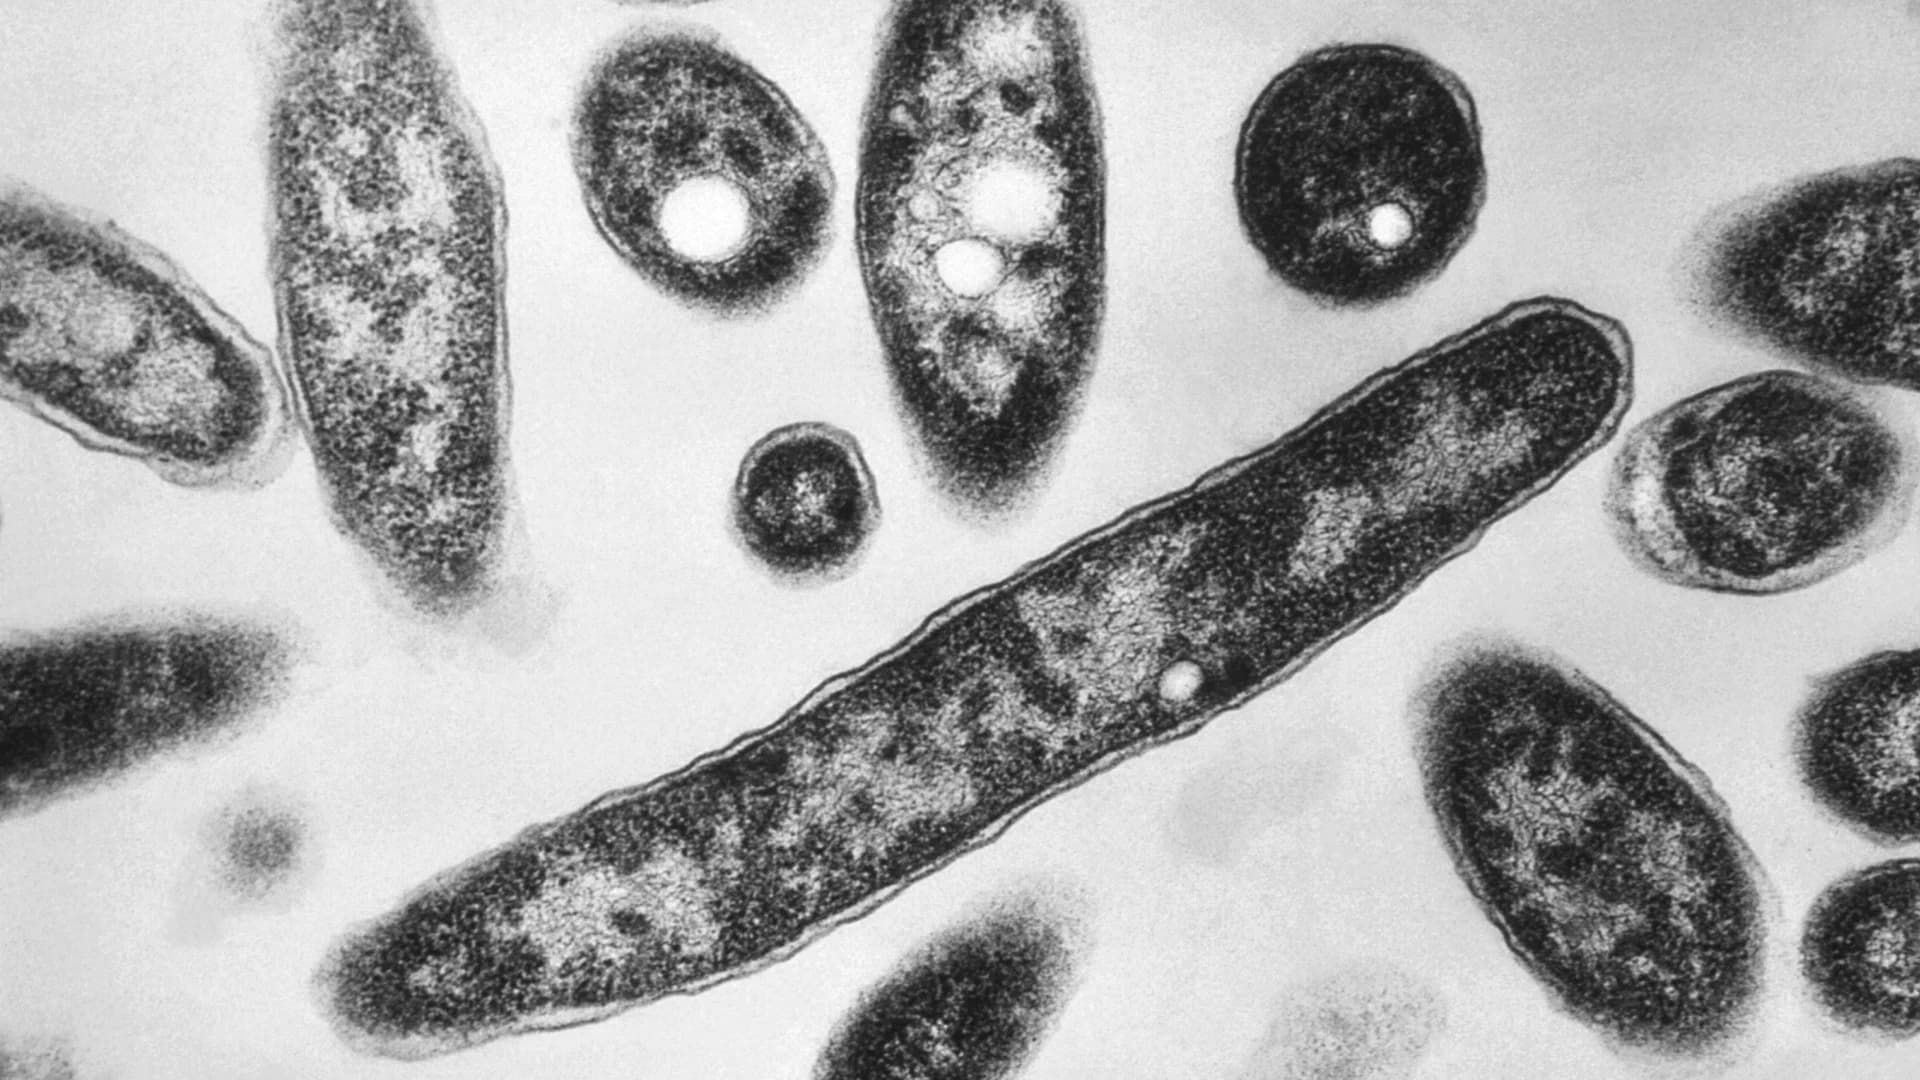 Health officials identify Legionnaires’ disease cluster in the Bronx